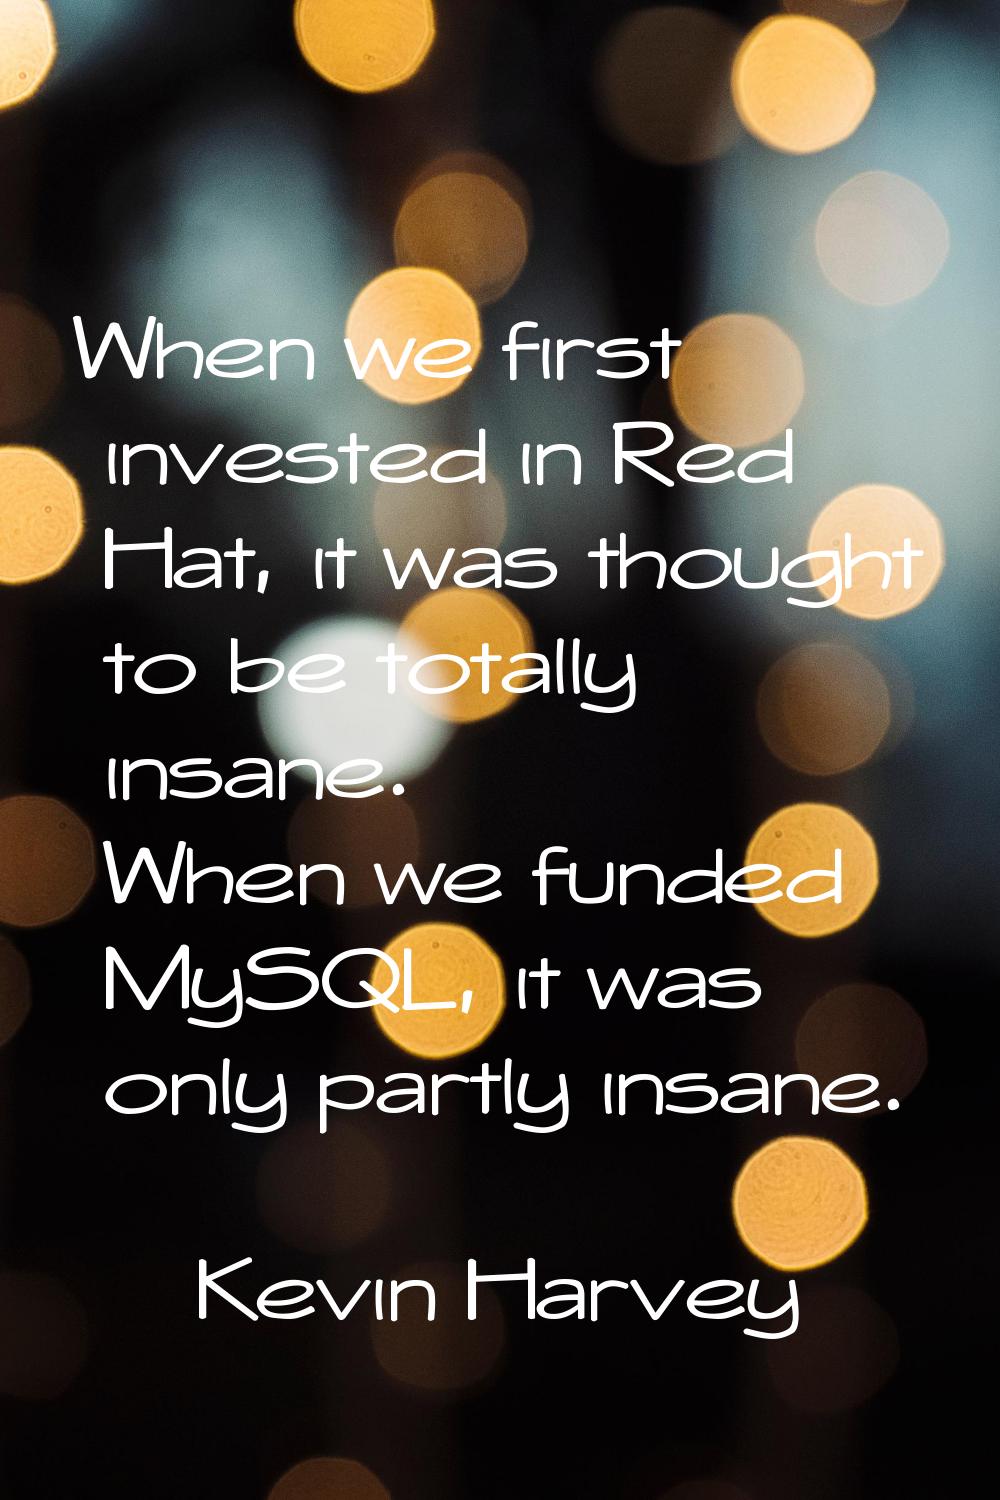 When we first invested in Red Hat, it was thought to be totally insane. When we funded MySQL, it wa